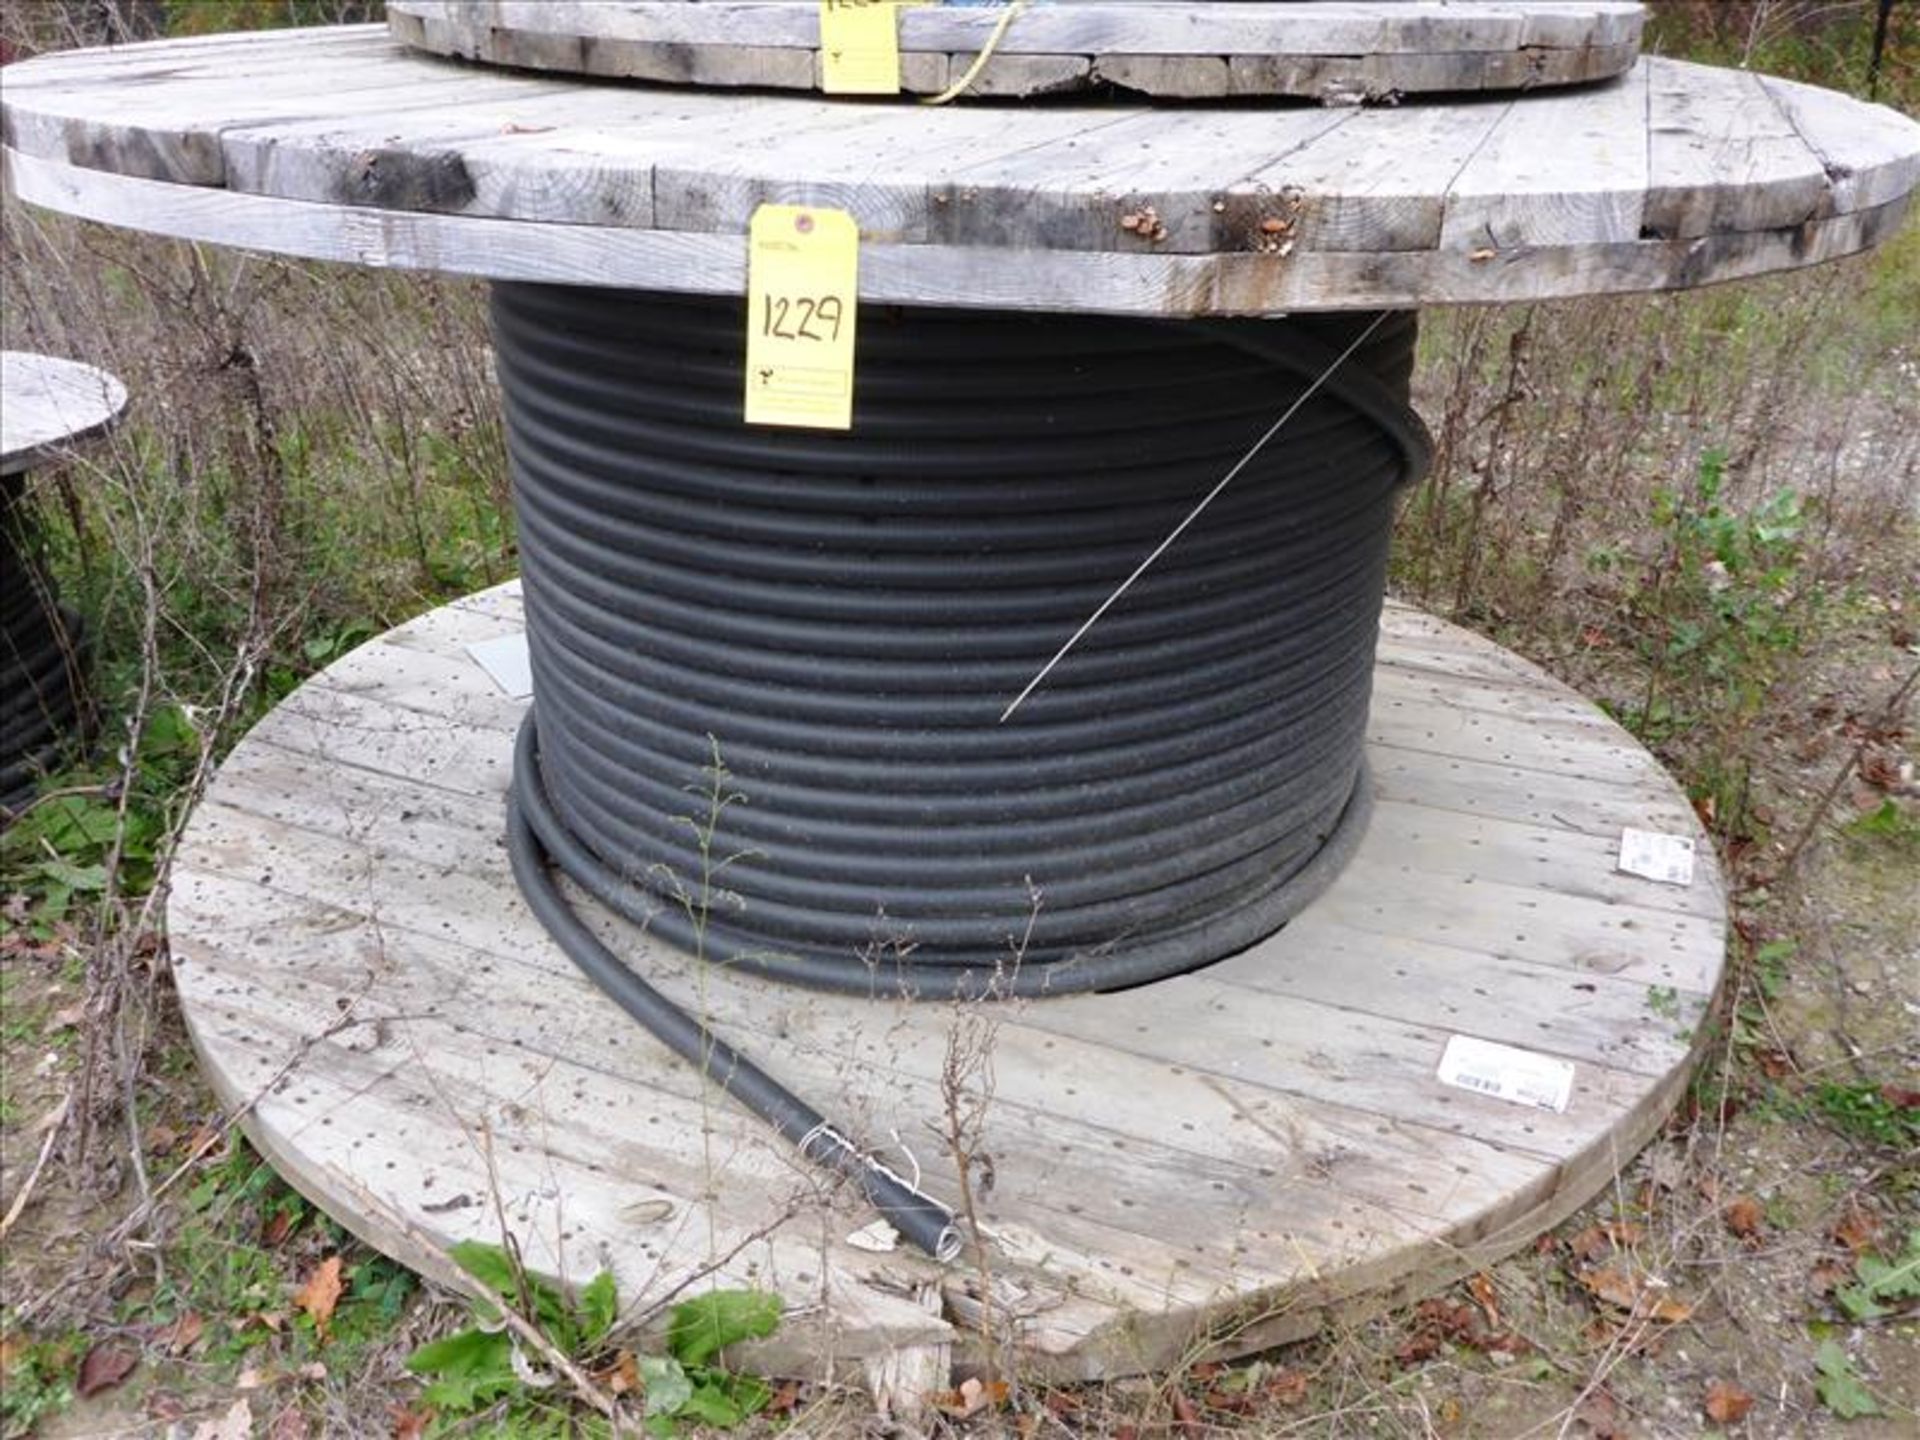 reel of electrical cable, approx. 500 ft. 00244 M-I Jan 2013 Nexans Firex - II 2/0 AWG /3C Teck 90